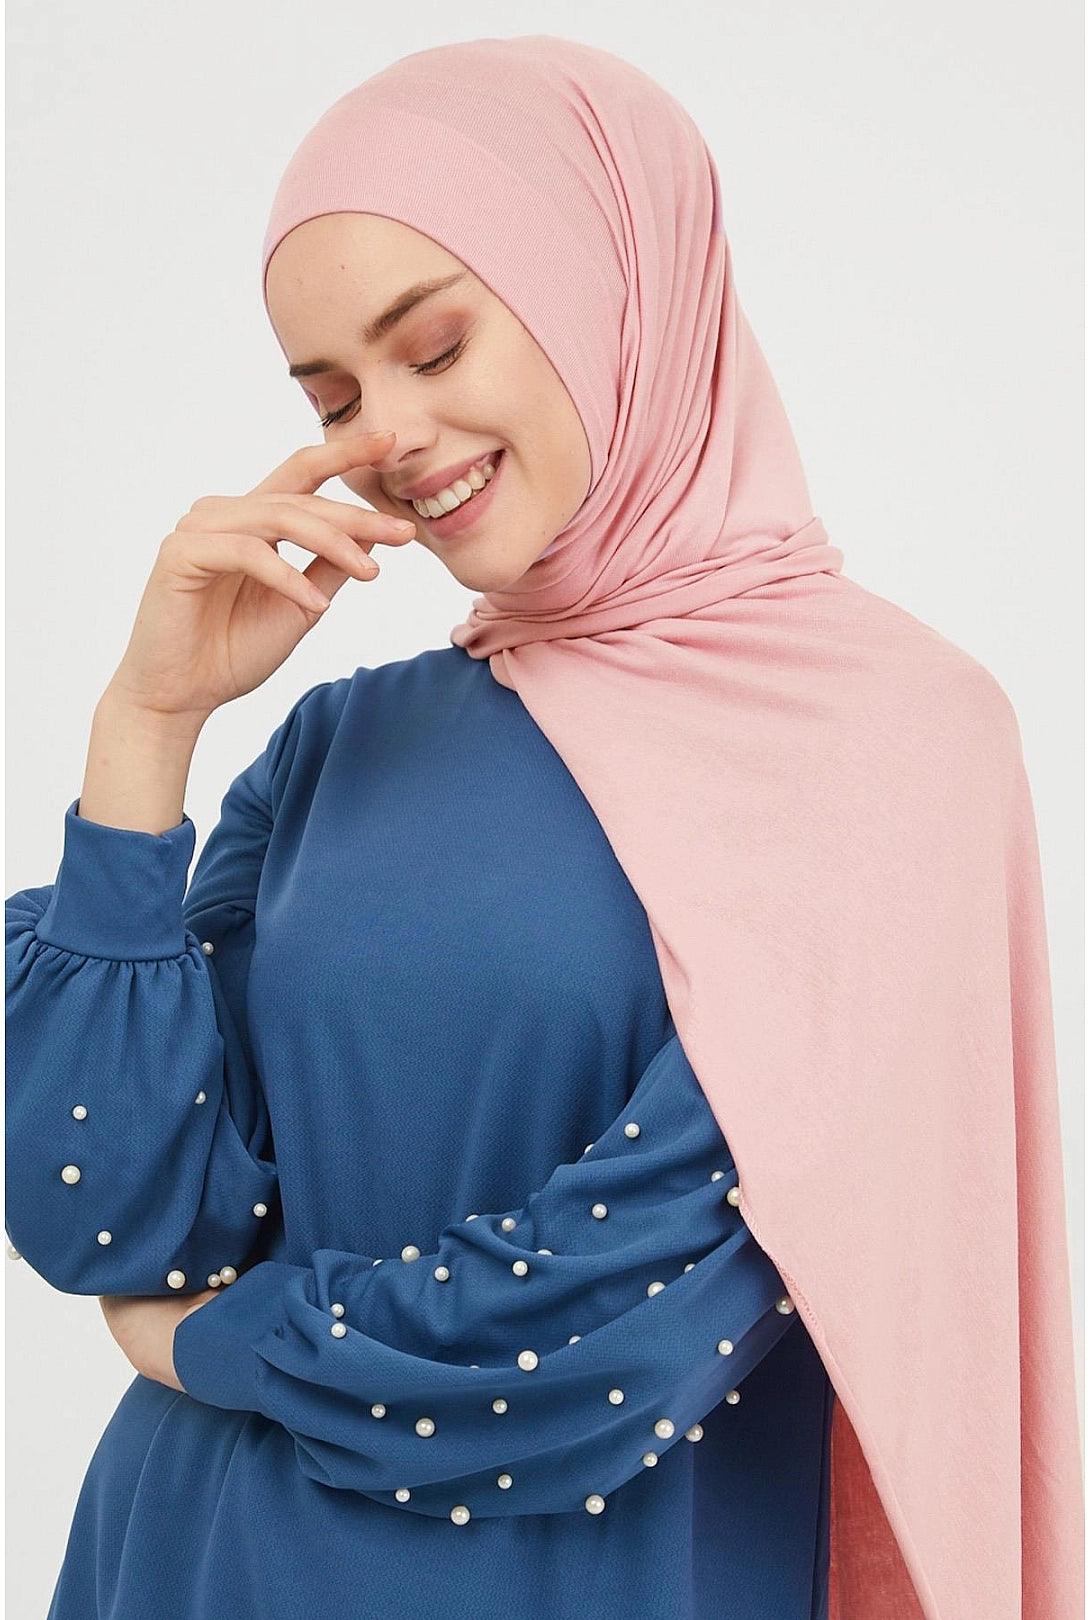 Liny Cotton Combed Hijab Scarf - Salmon Pink